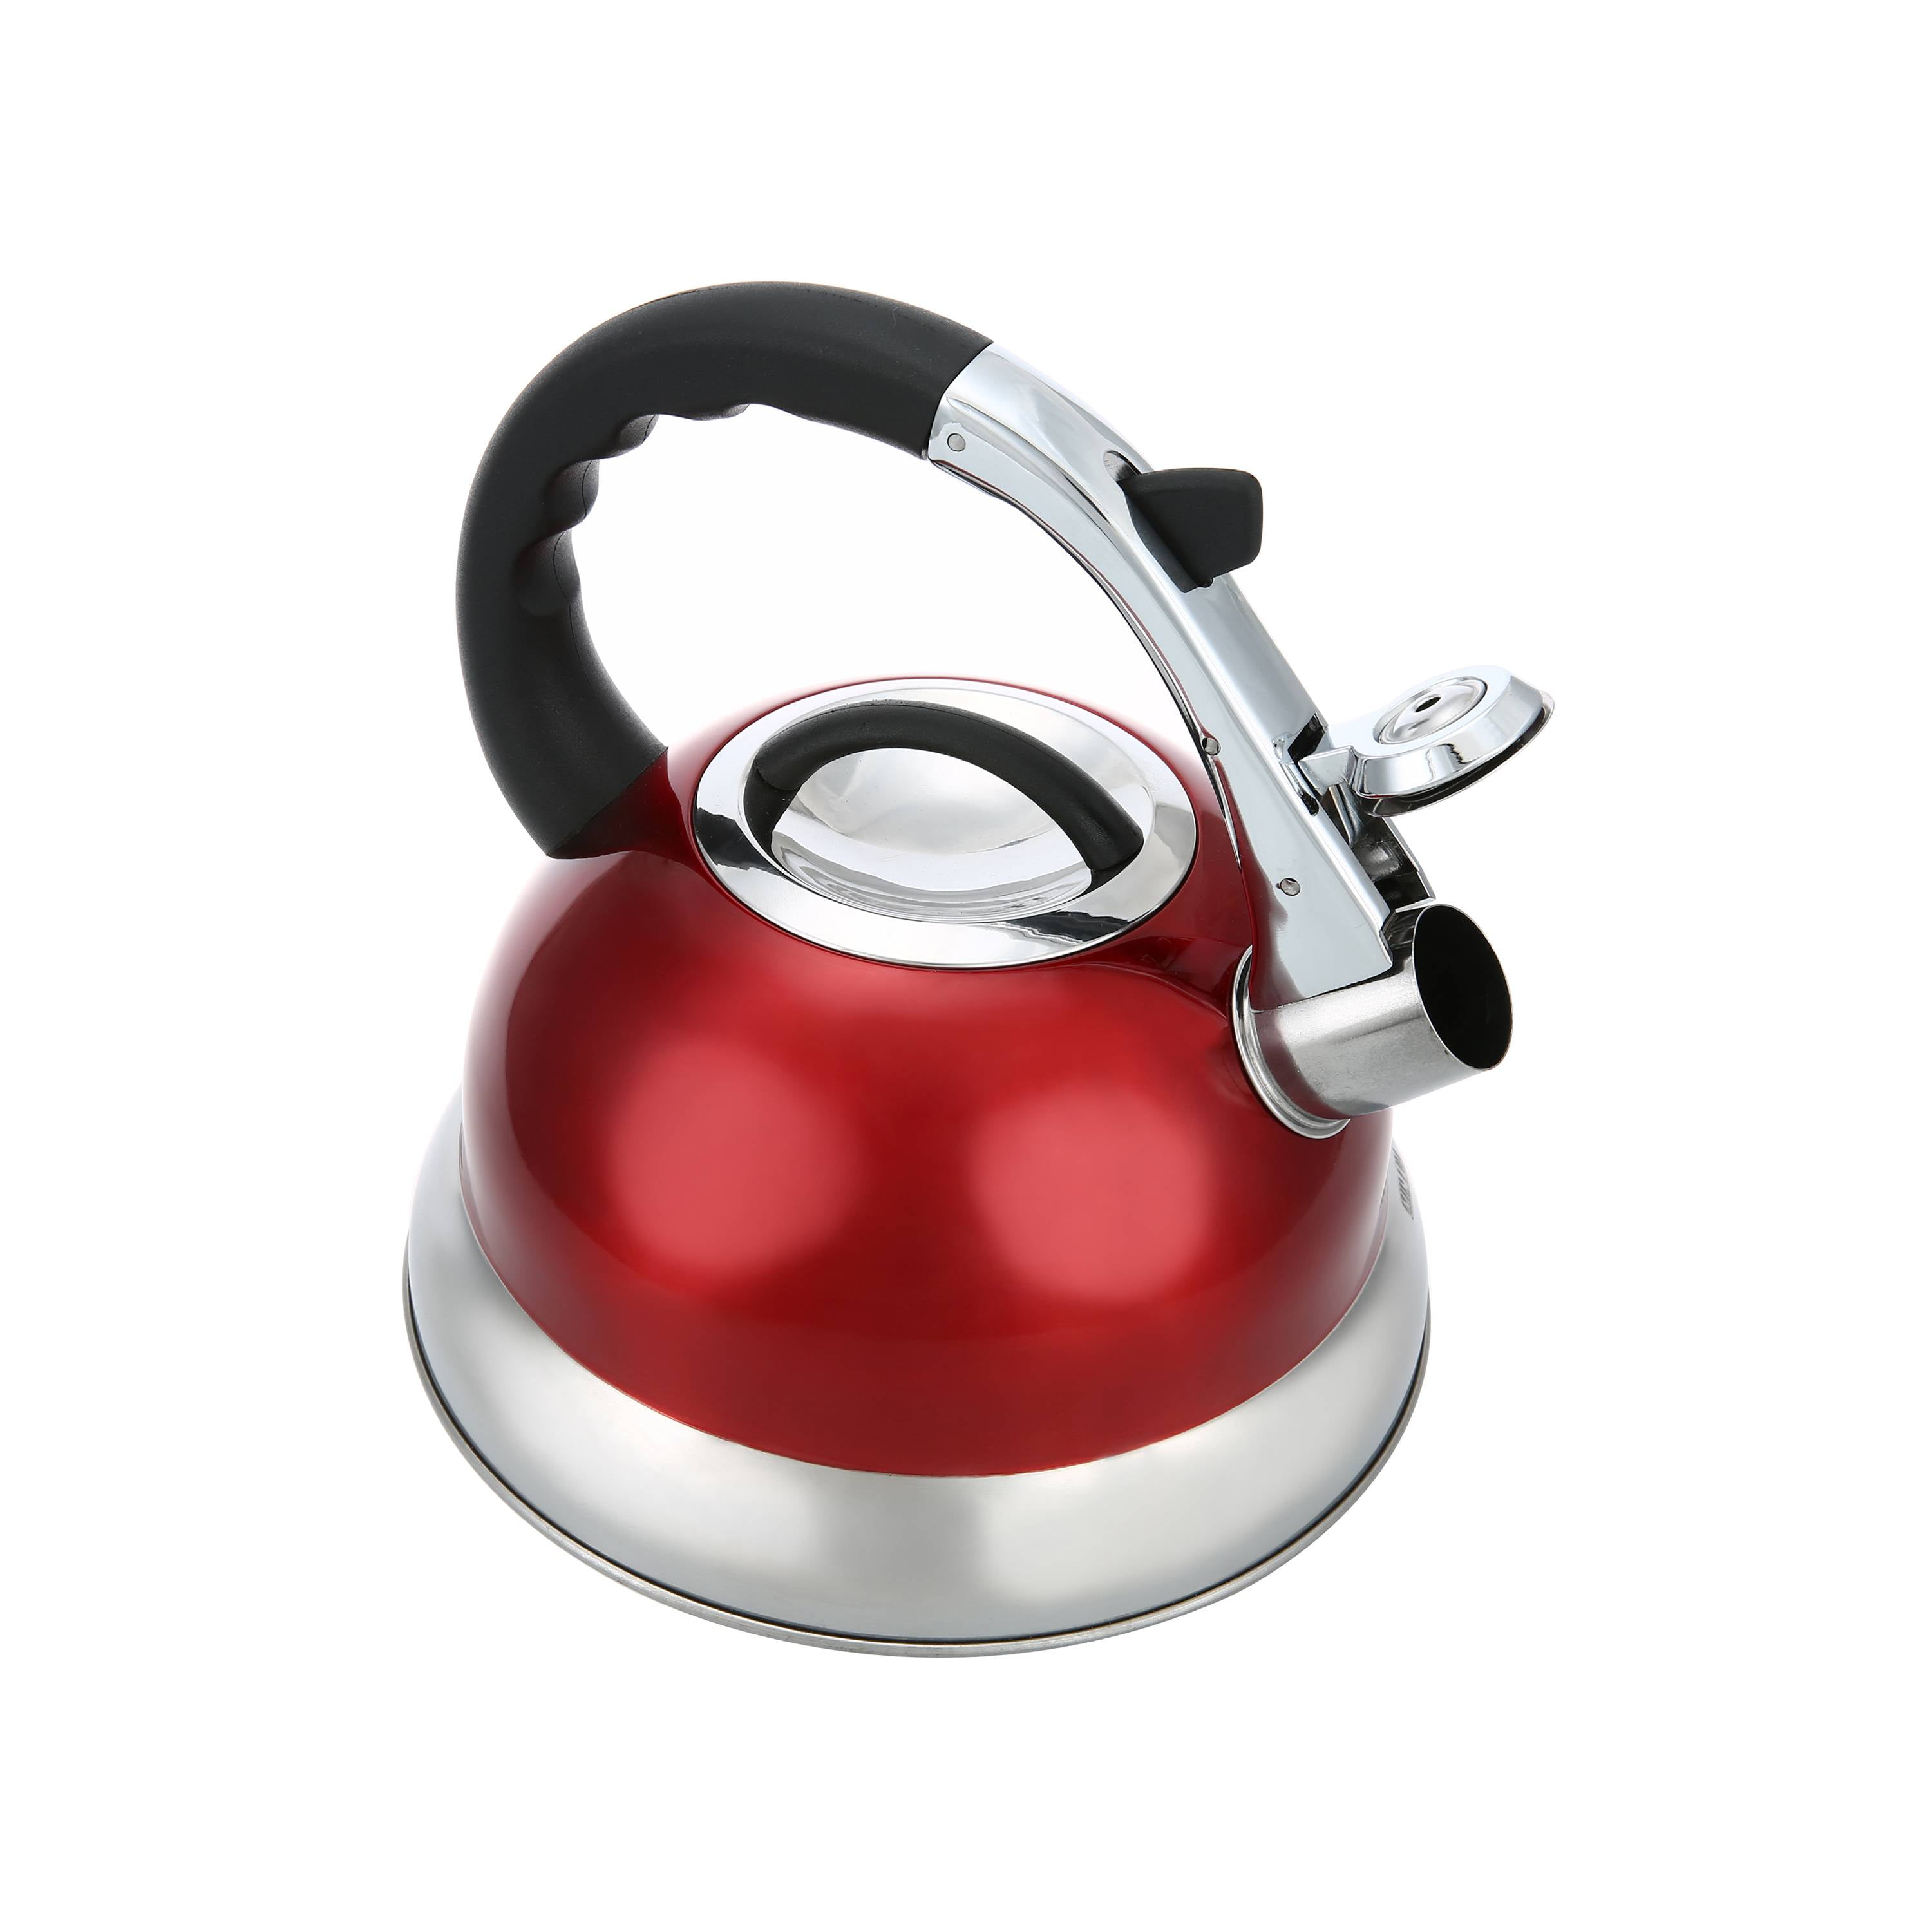 Red Whistling Tea Kettle by Home-Style Kitchen - Miles Kimball